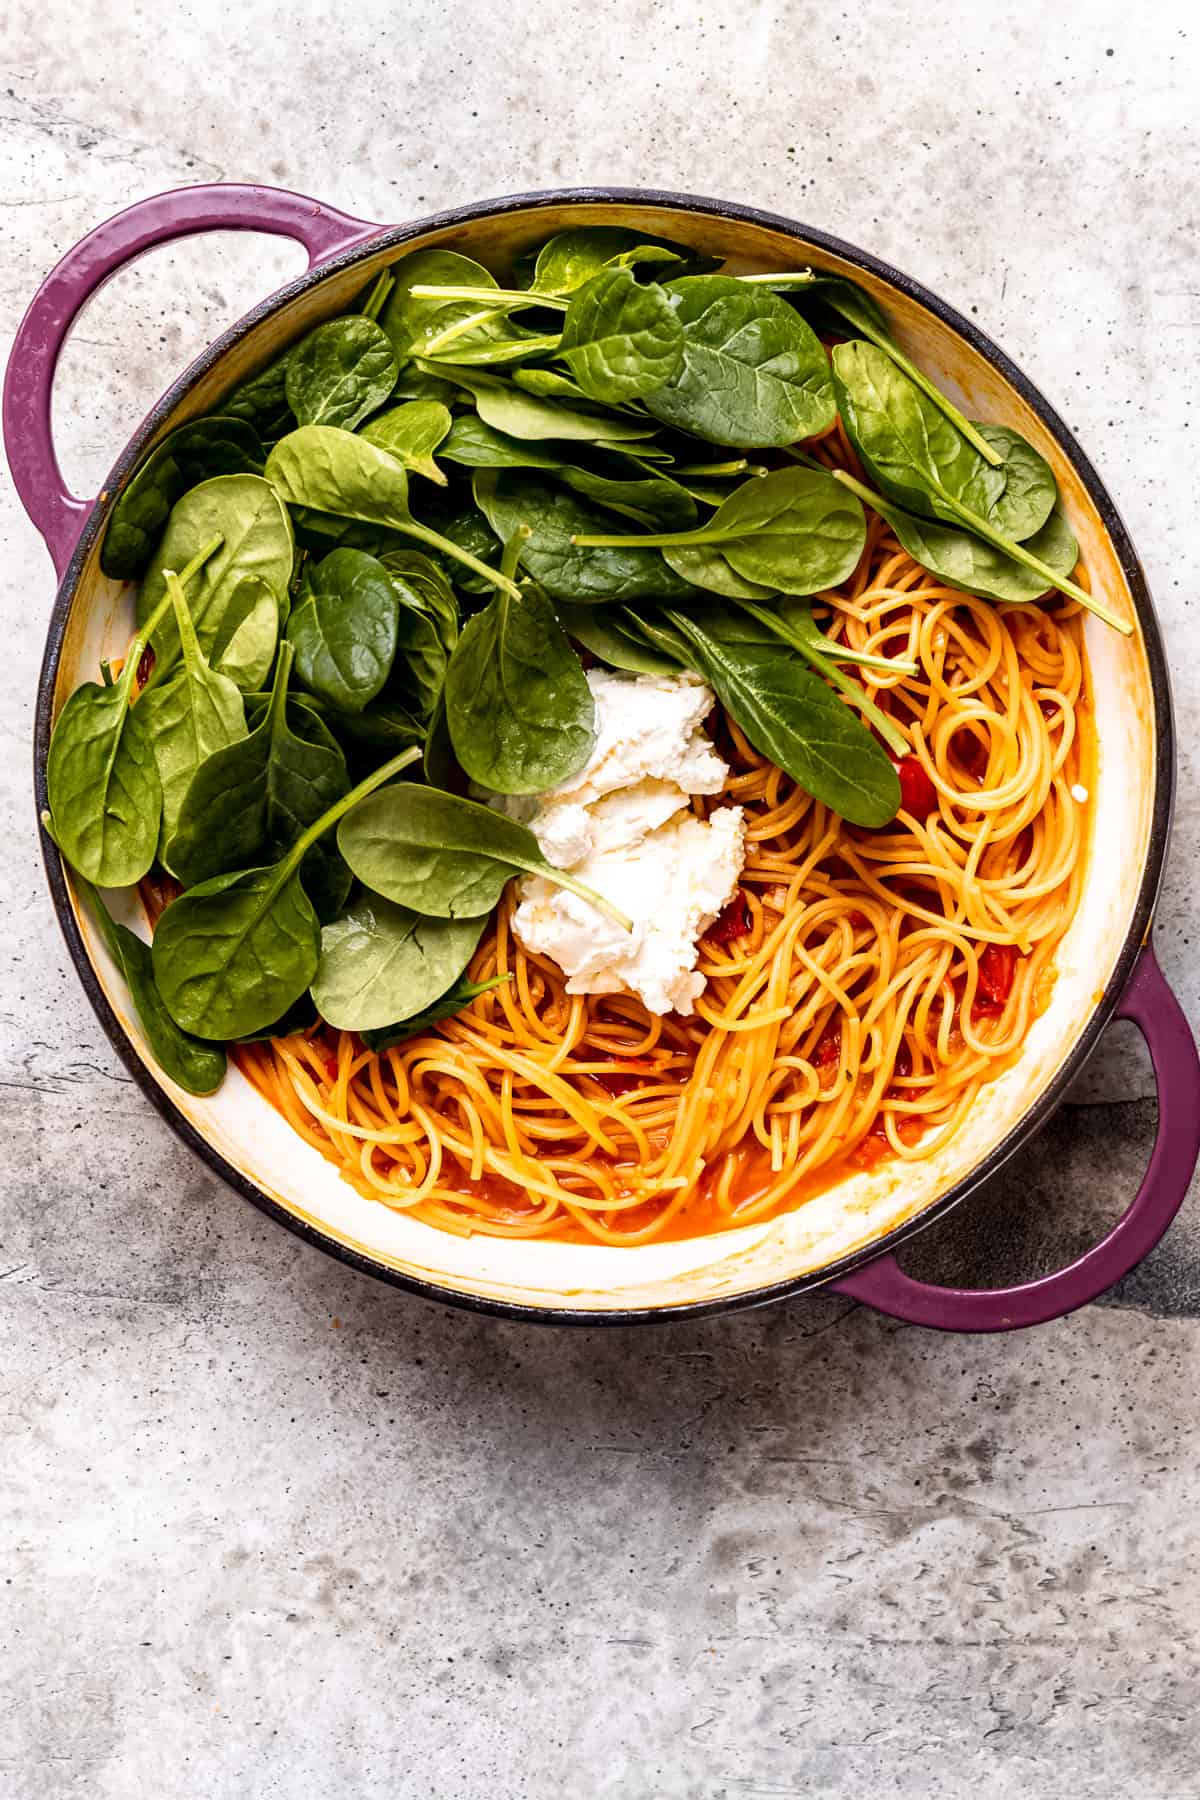 Spinach and mascarpone are added to a pan.